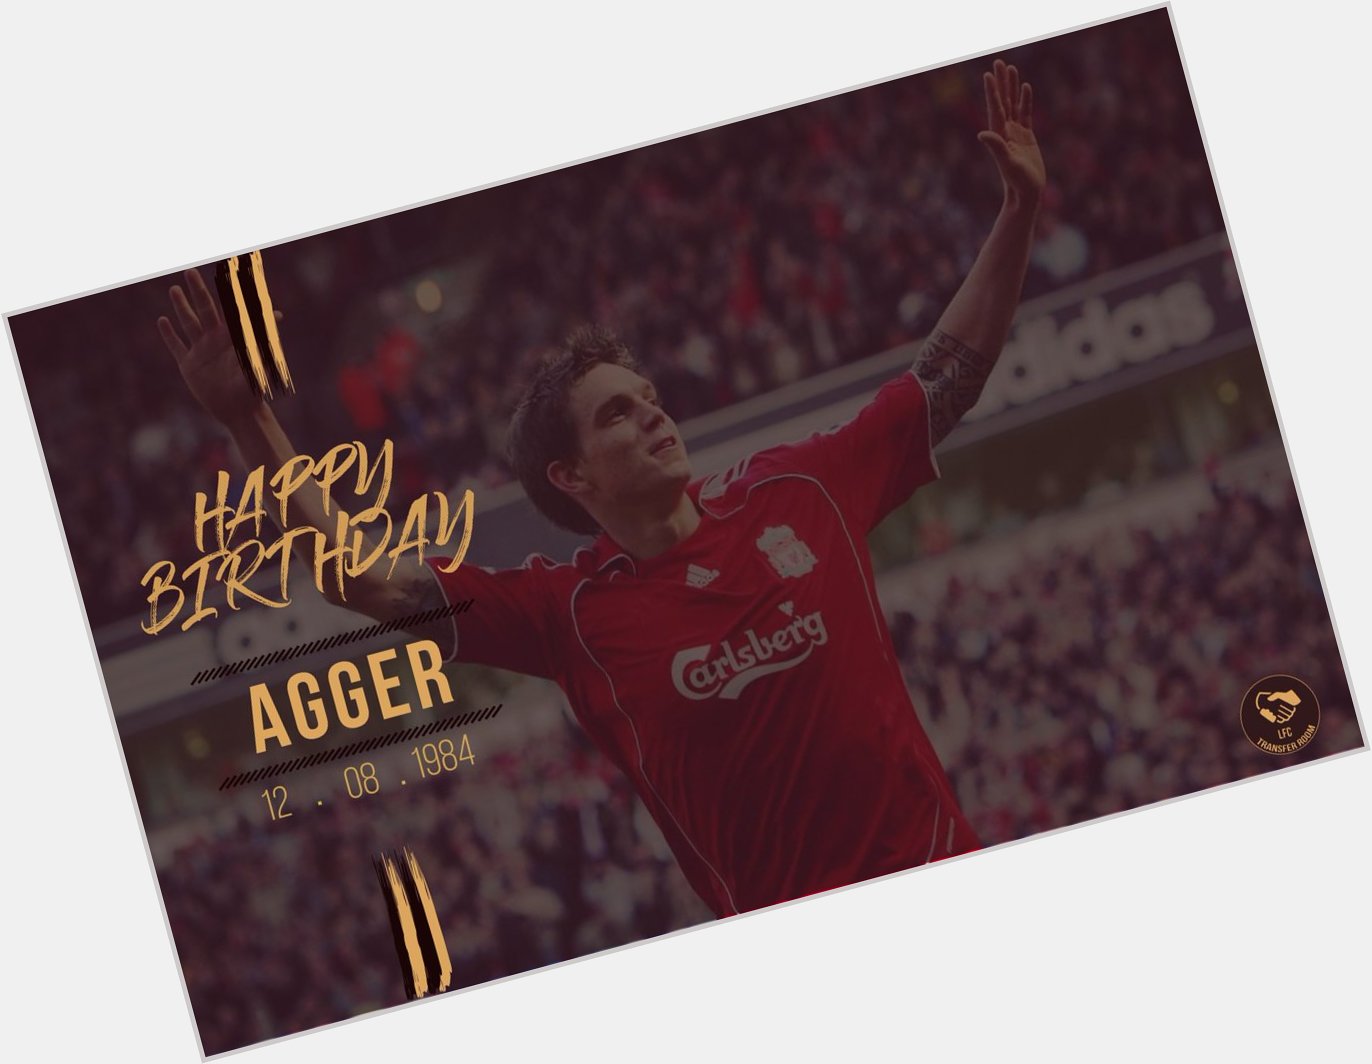   Happy Birthday to Liverpool s adopted scouser Daniel Agger, who is turning 33 years-old today! 